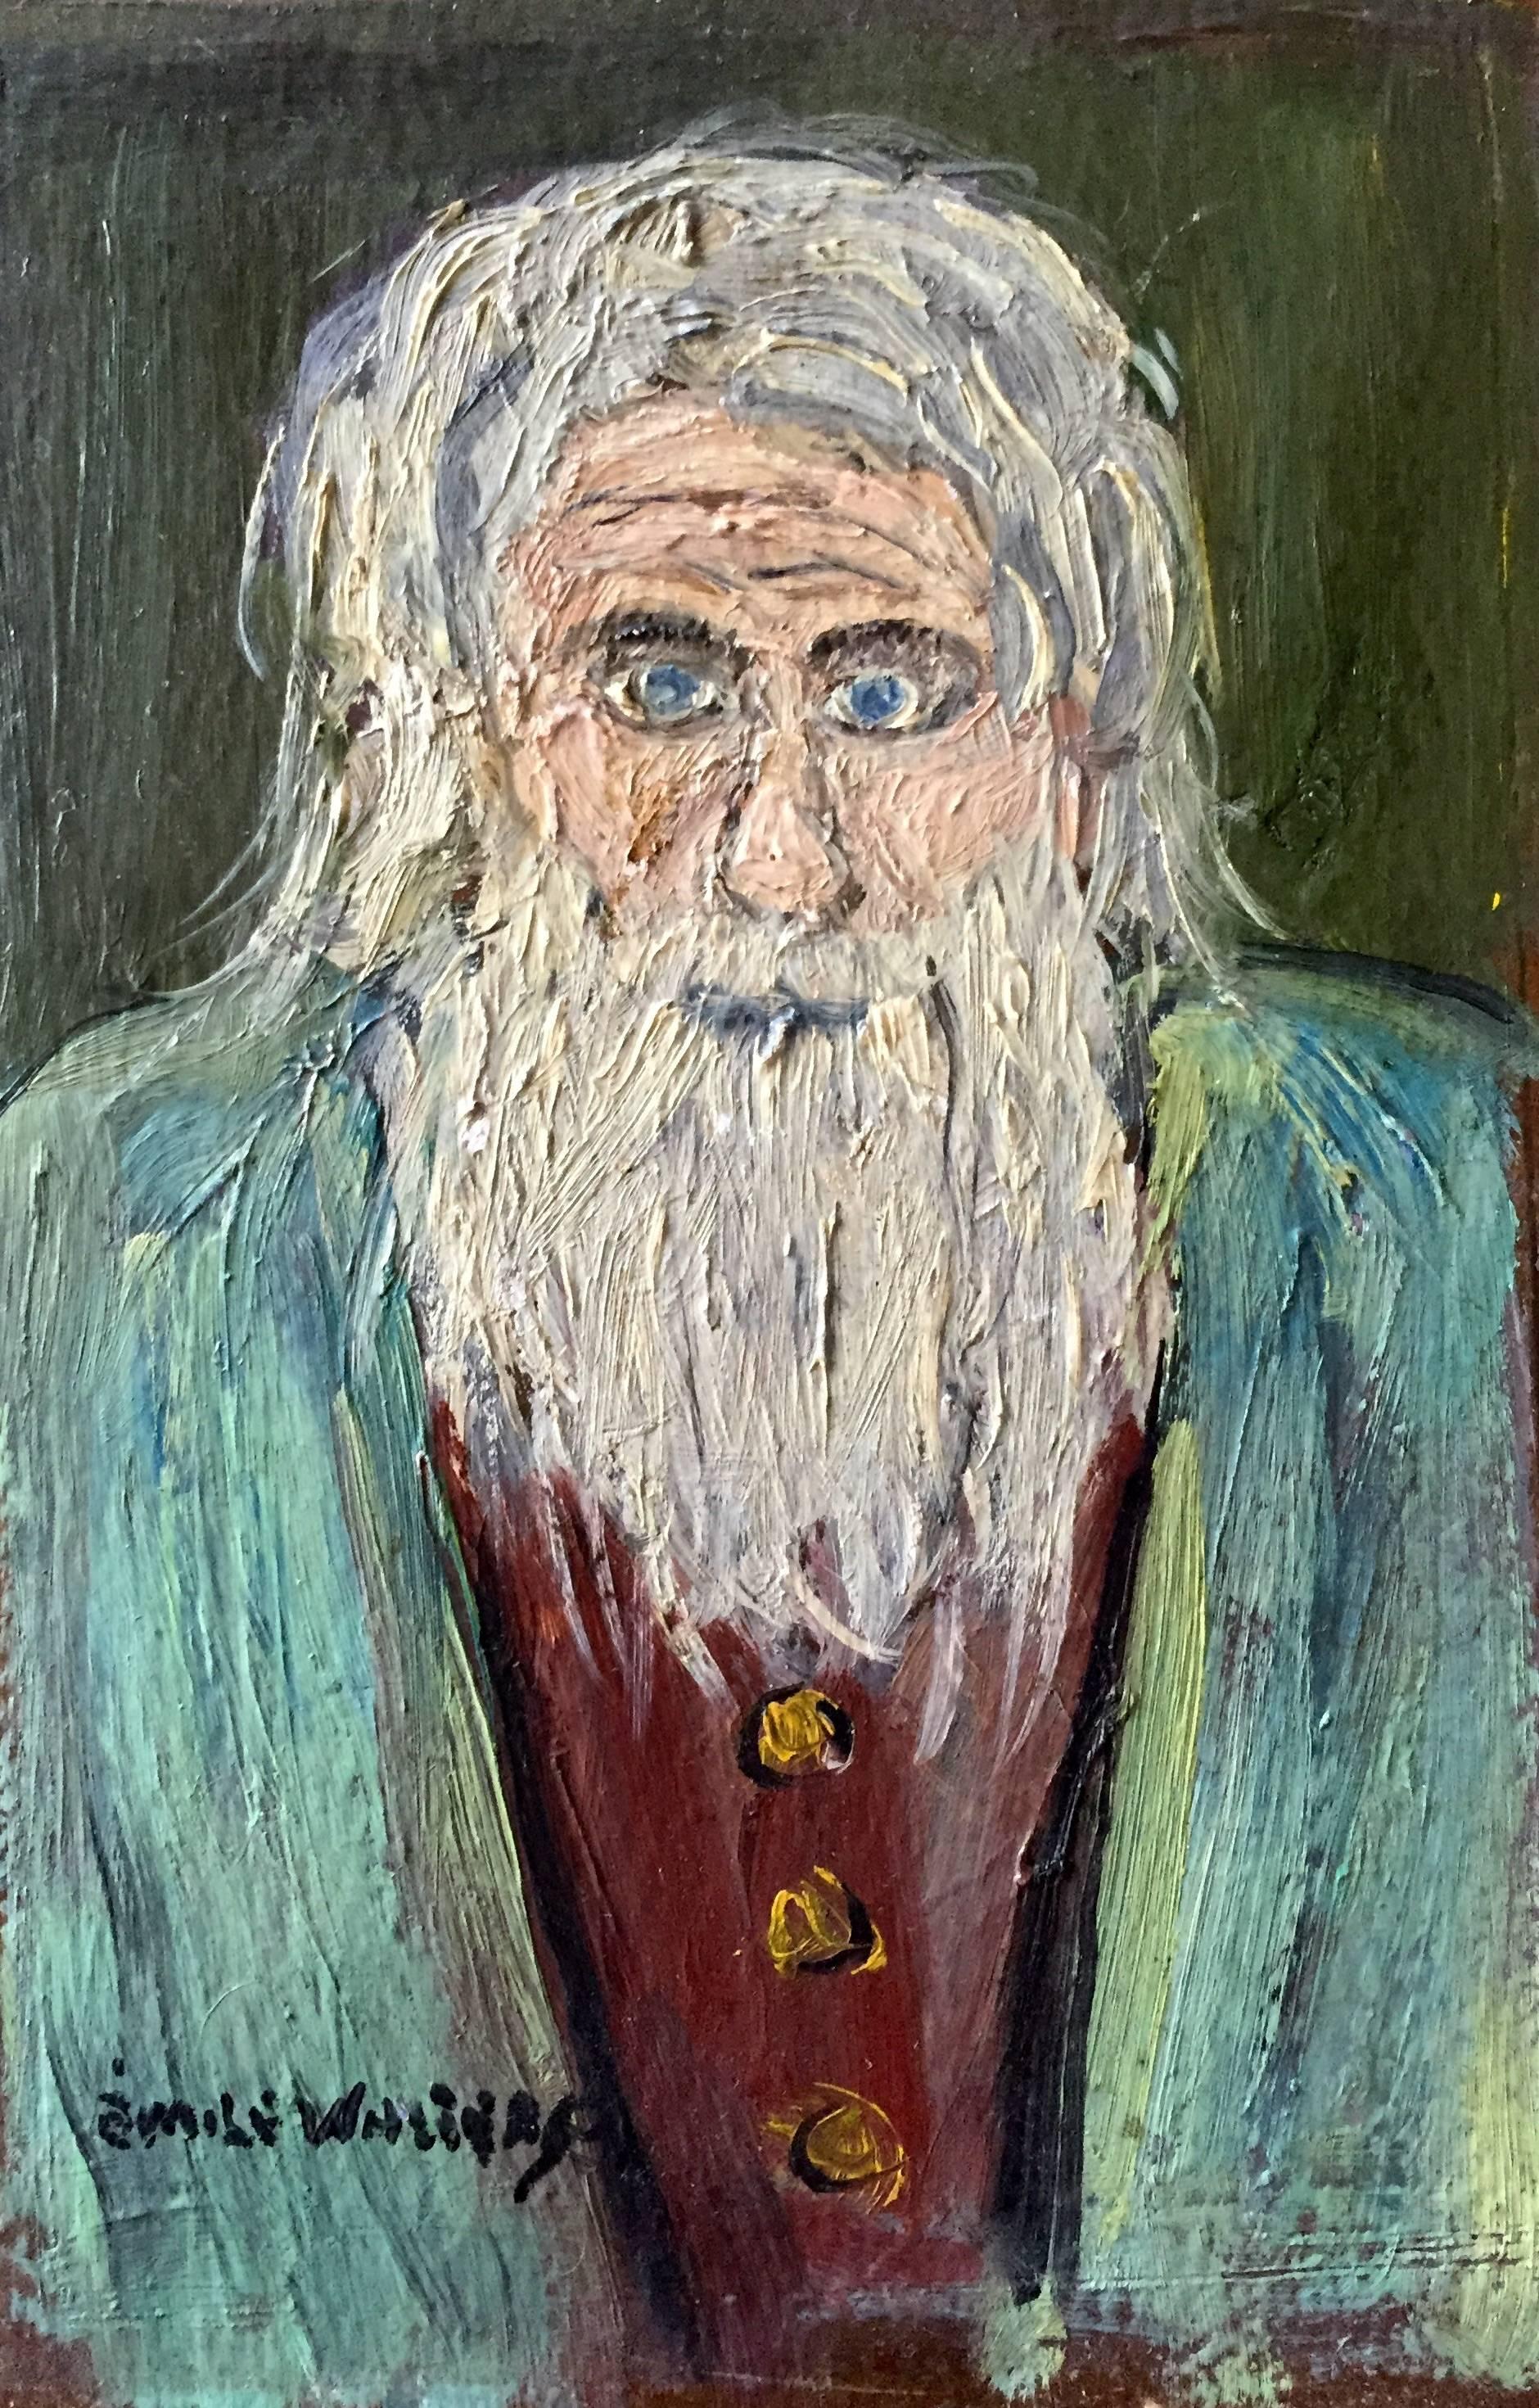 Emile Walters Figurative Painting - "Old Man of Iceland"